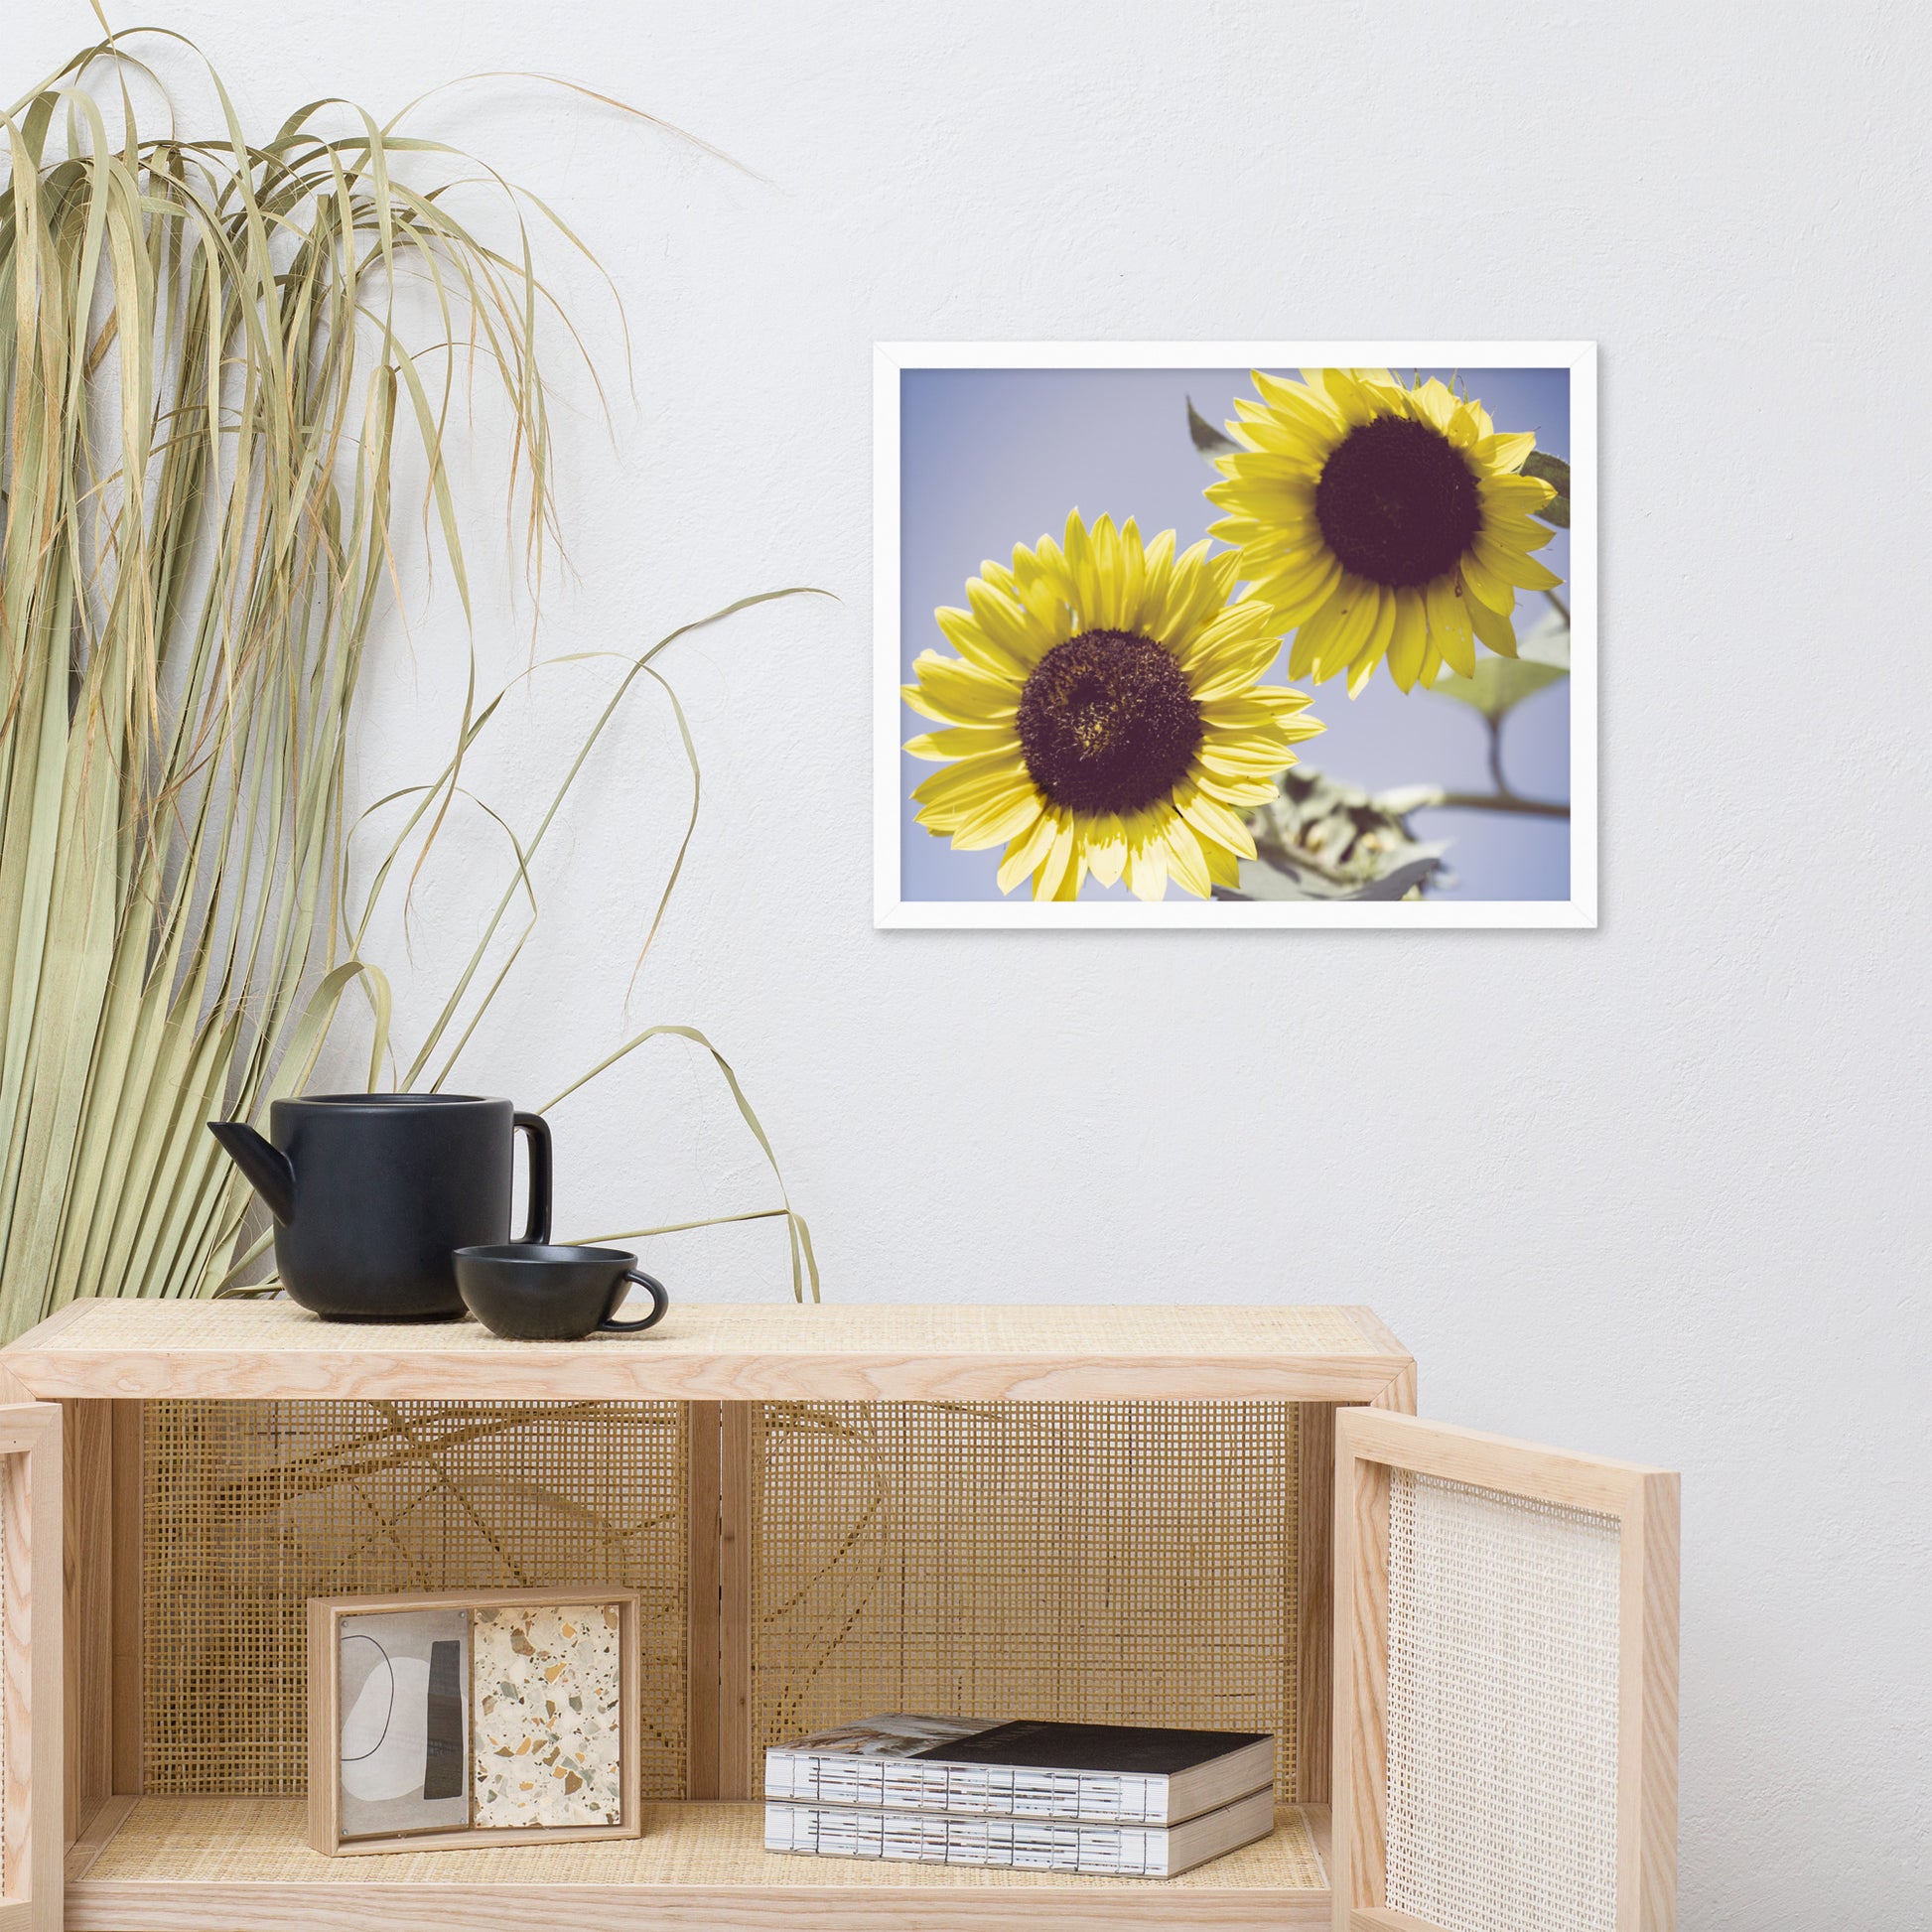 Modern Flower Art Prints: Aged Sunflowers Against Sky Abstract / Minimal / Rustic / Country / Farmhouse Style / Floral / Botanical / Nature Photo Framed Wall Art Print - Artwork - Wall Decor - Home Decor